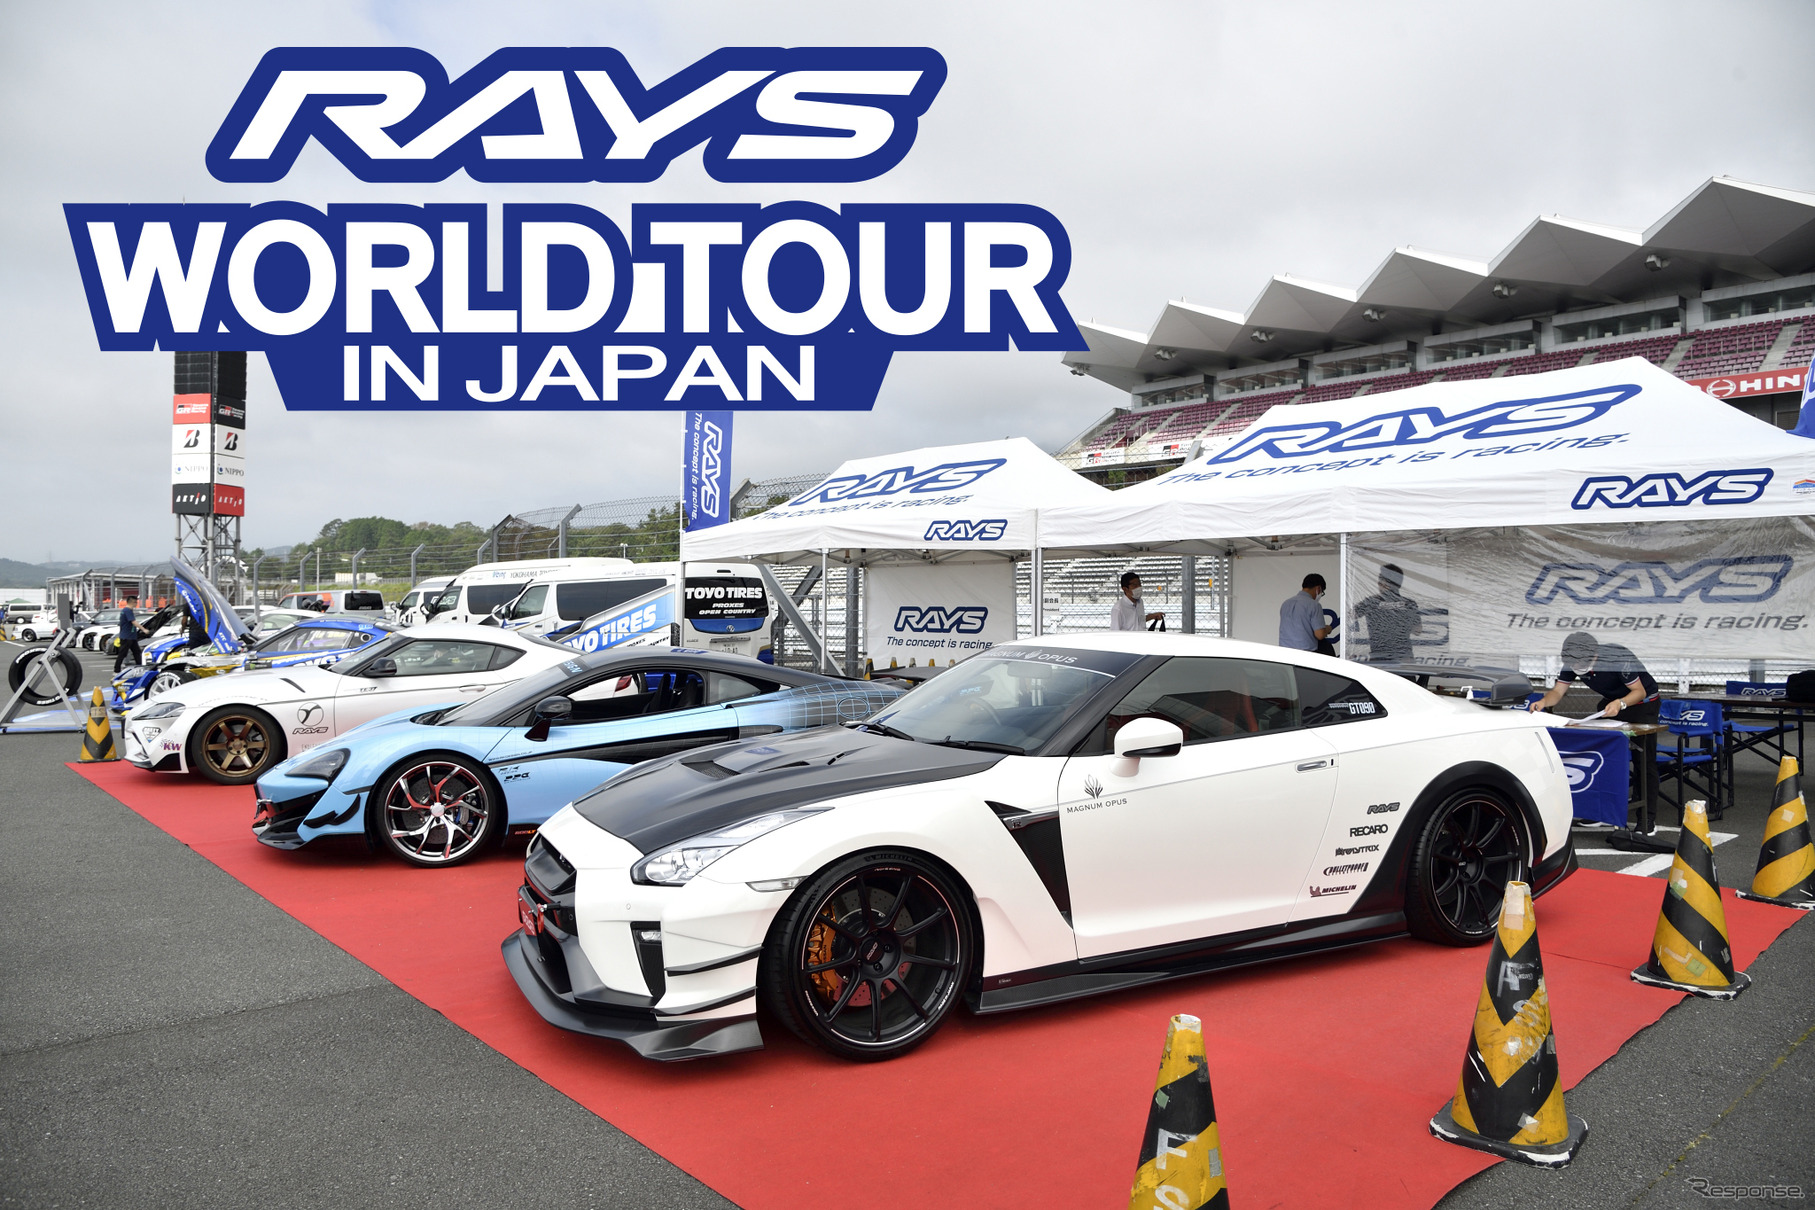 RAYS WORLD TOUR IN JAPAN